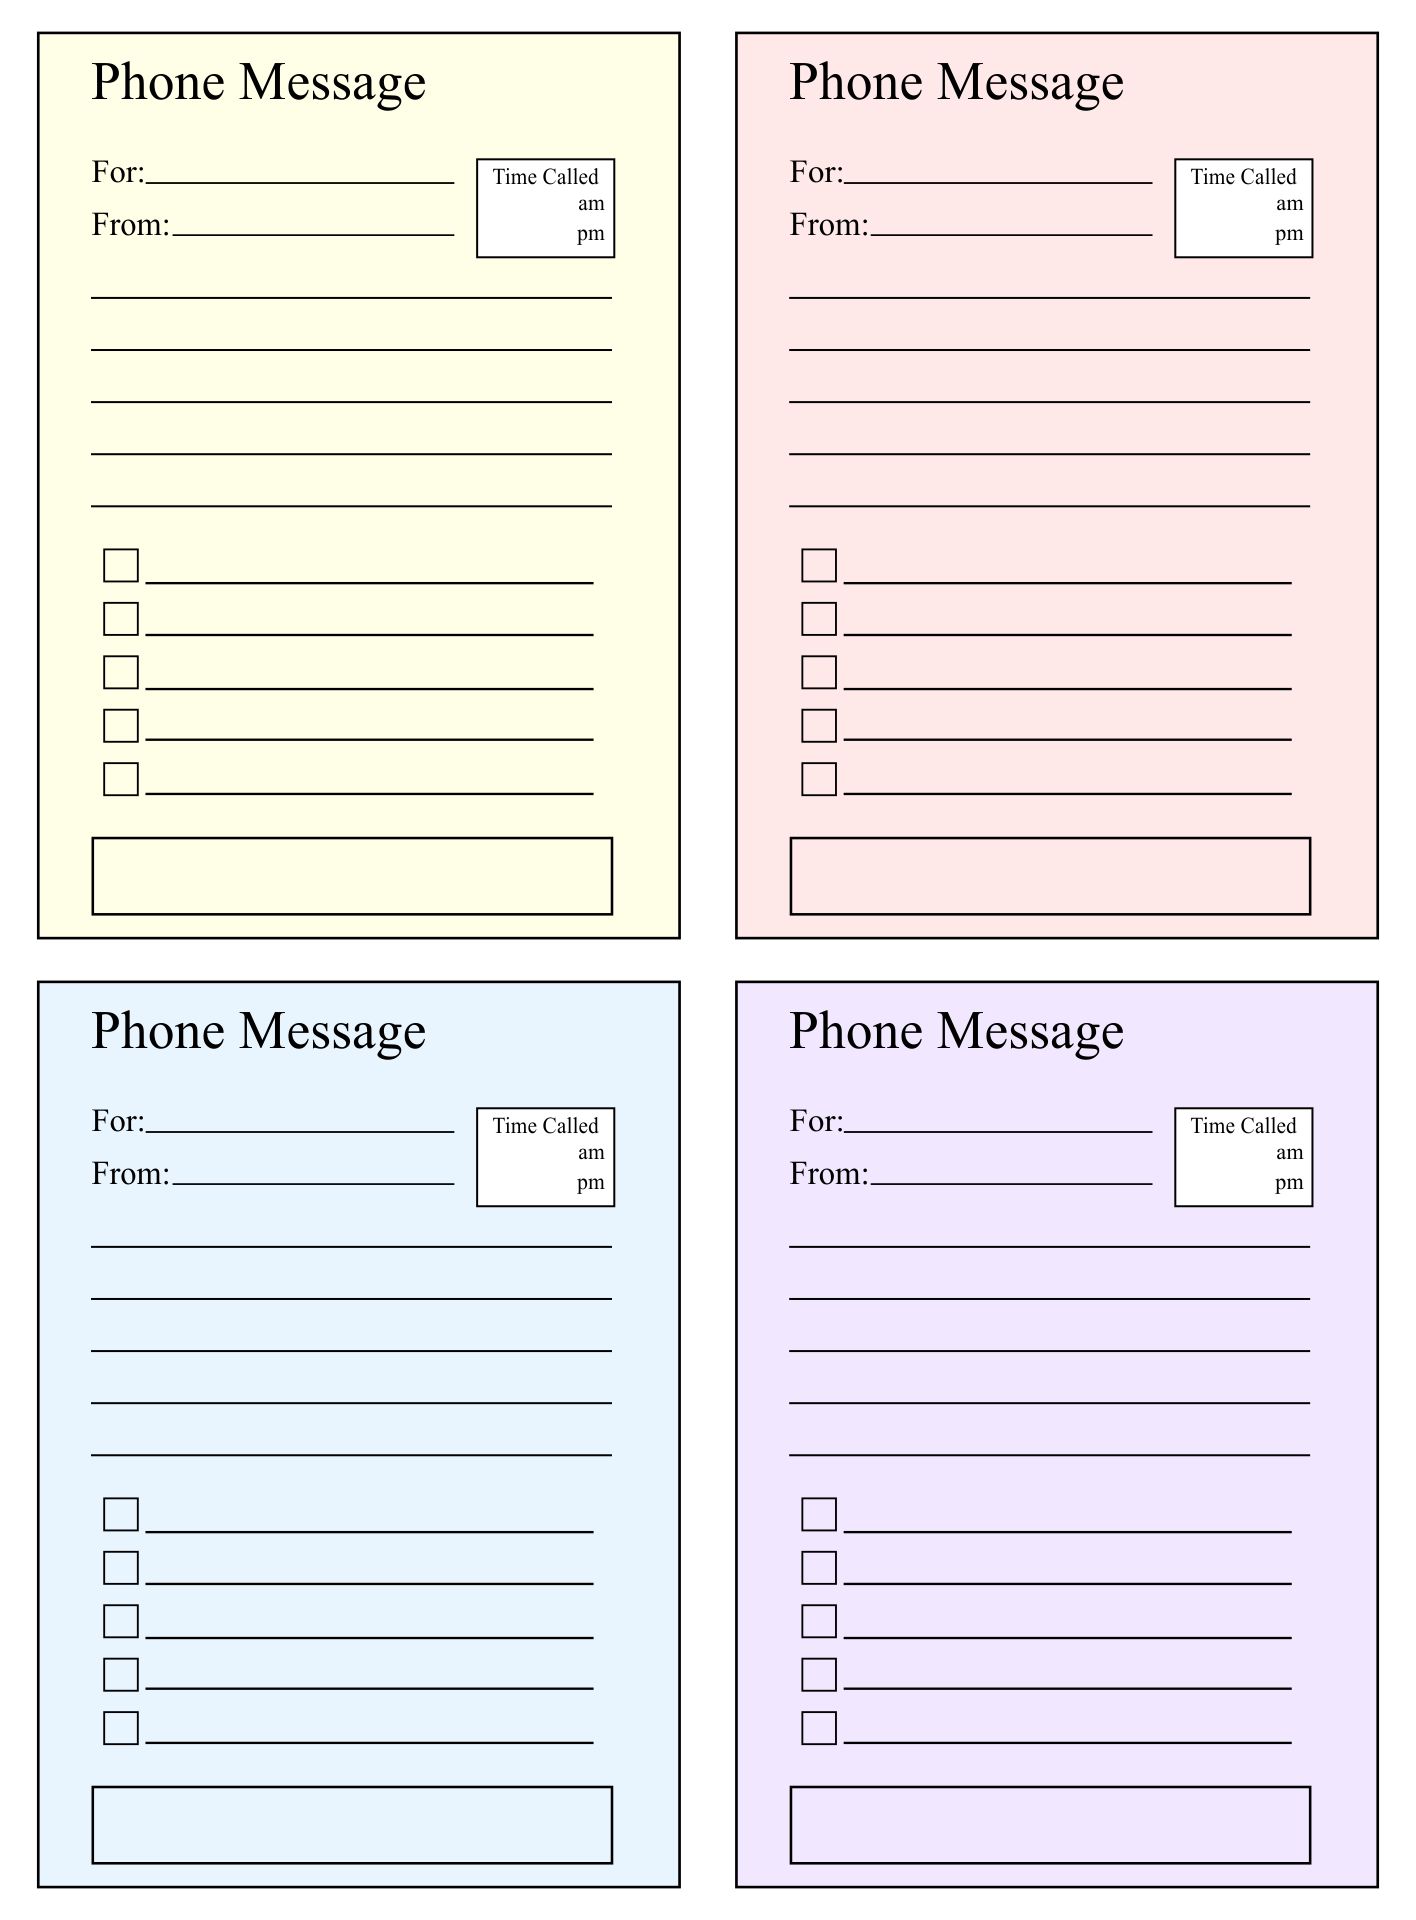 printable-phone-message-forms-printable-forms-free-online